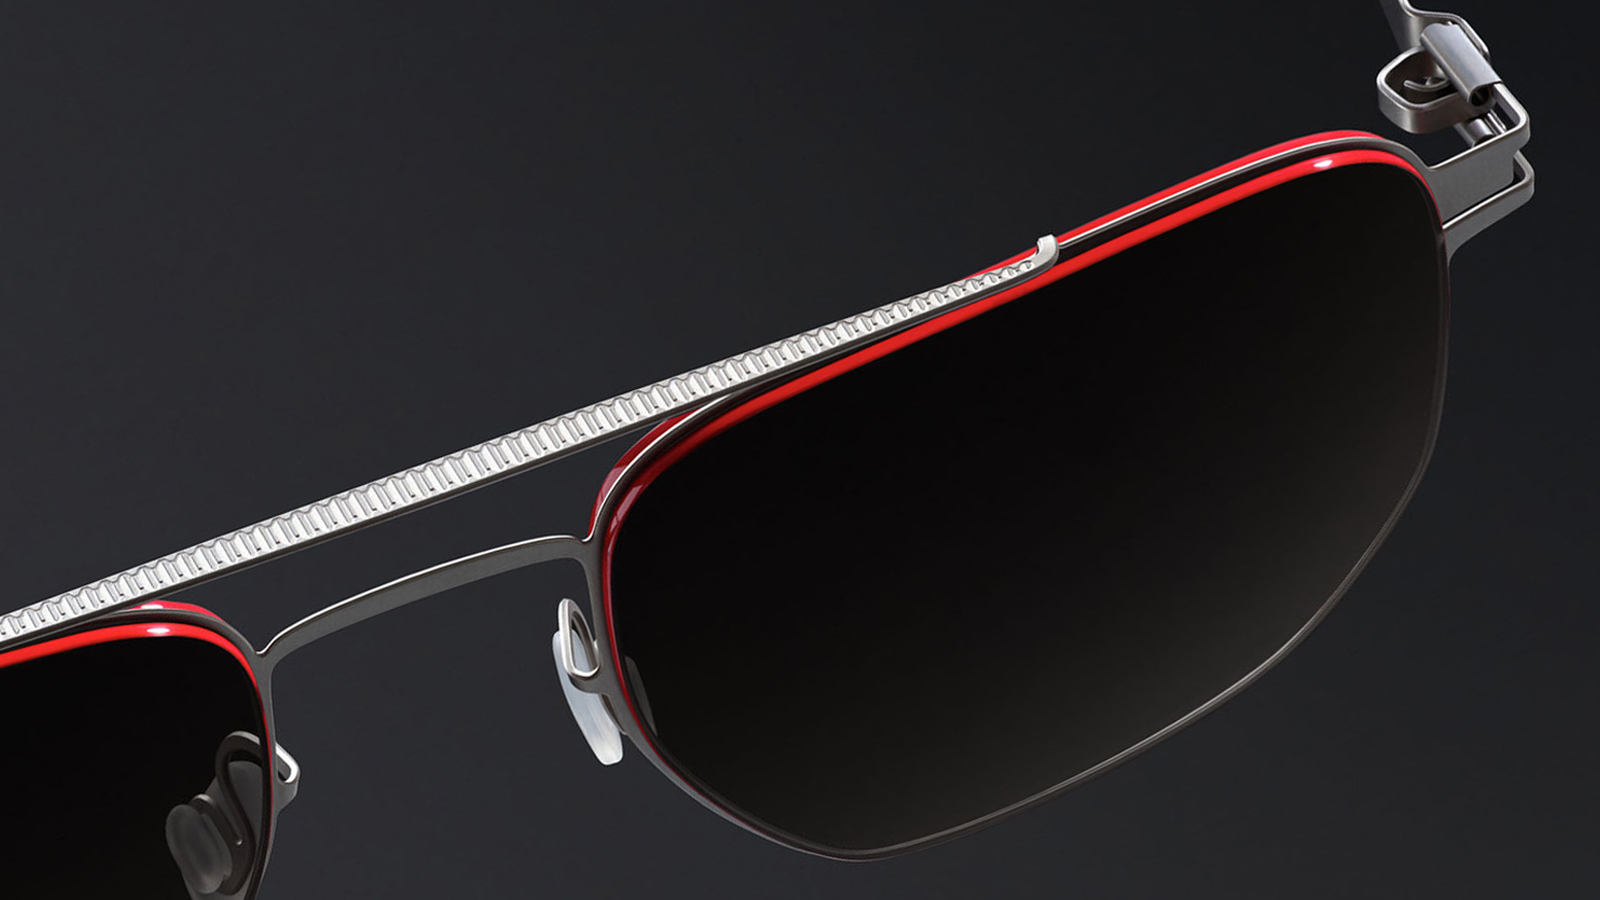 Leica sunglasses bring firm's camera lens-inspired tech to your face